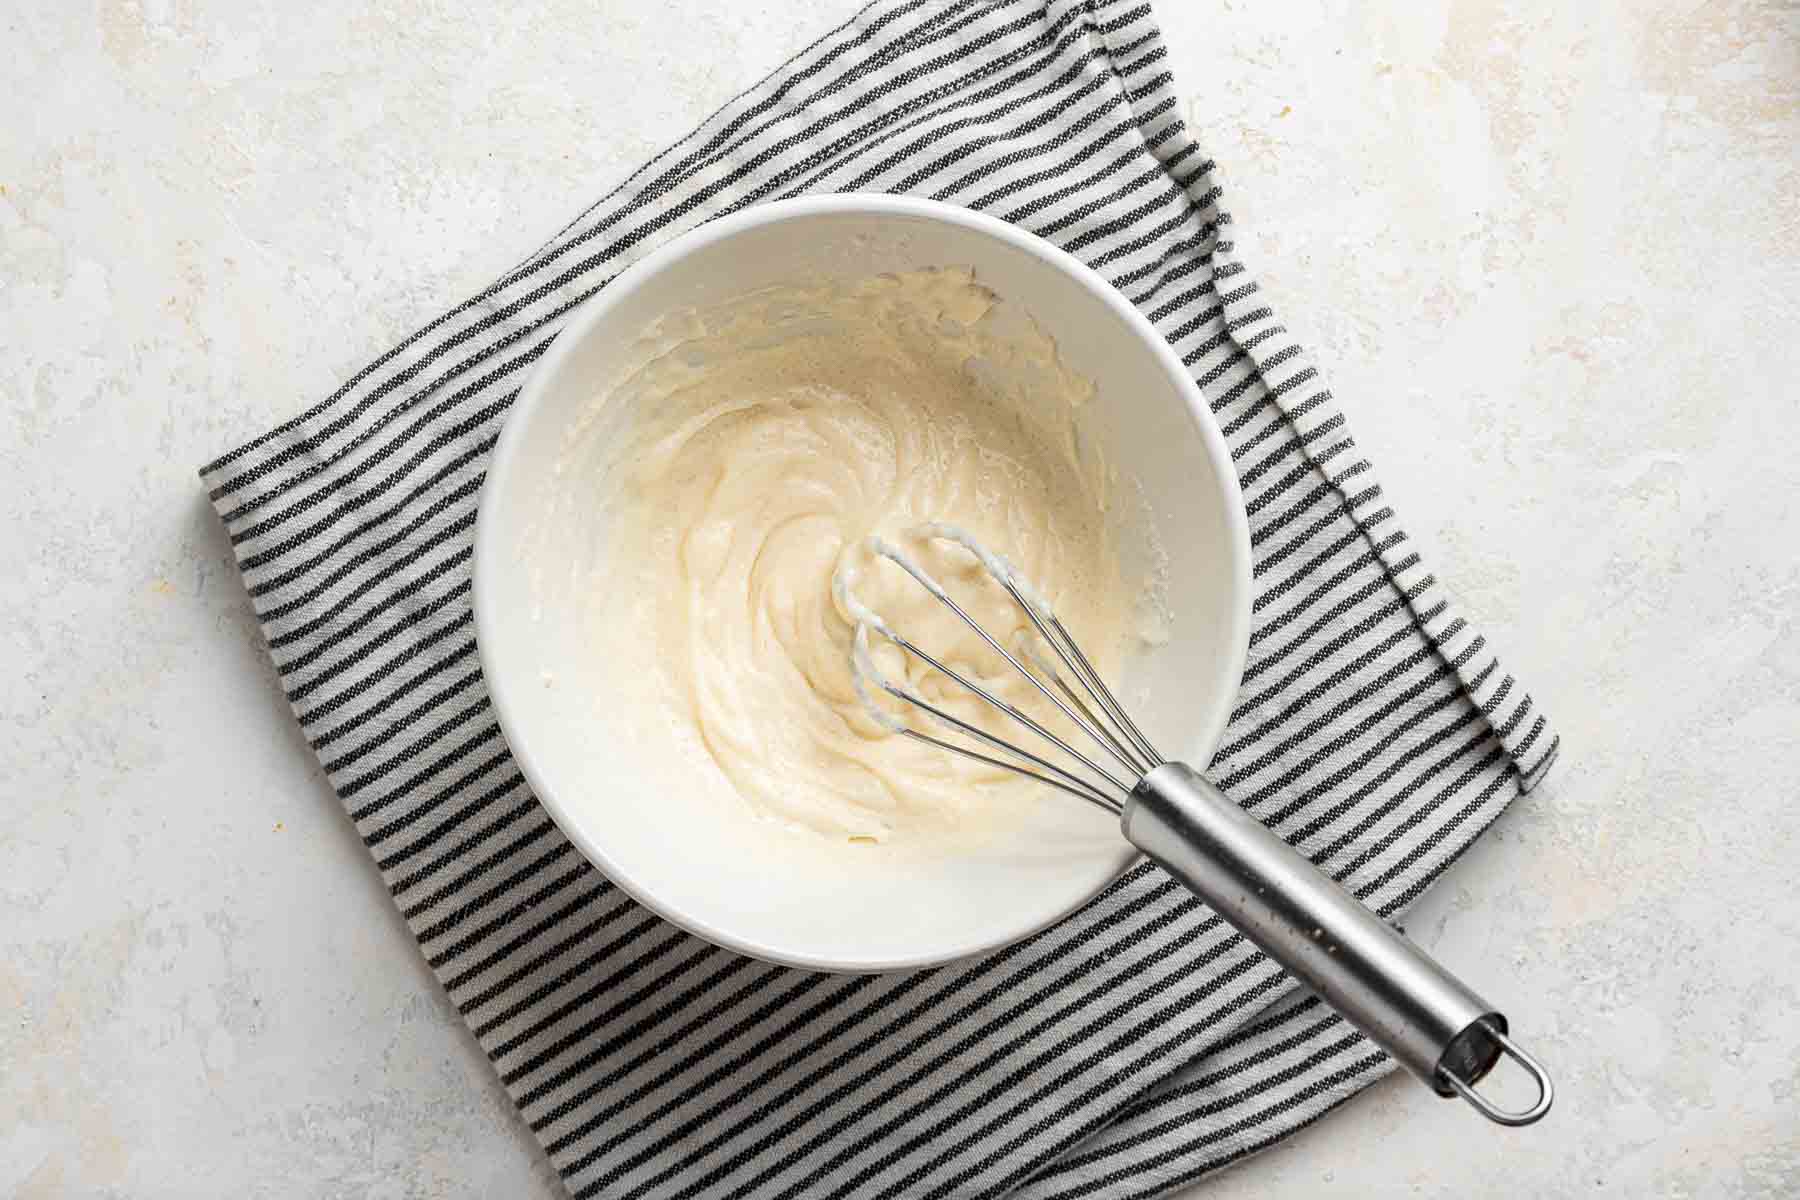 Cheesecake batter for swirling into cheesecake brownie bites.